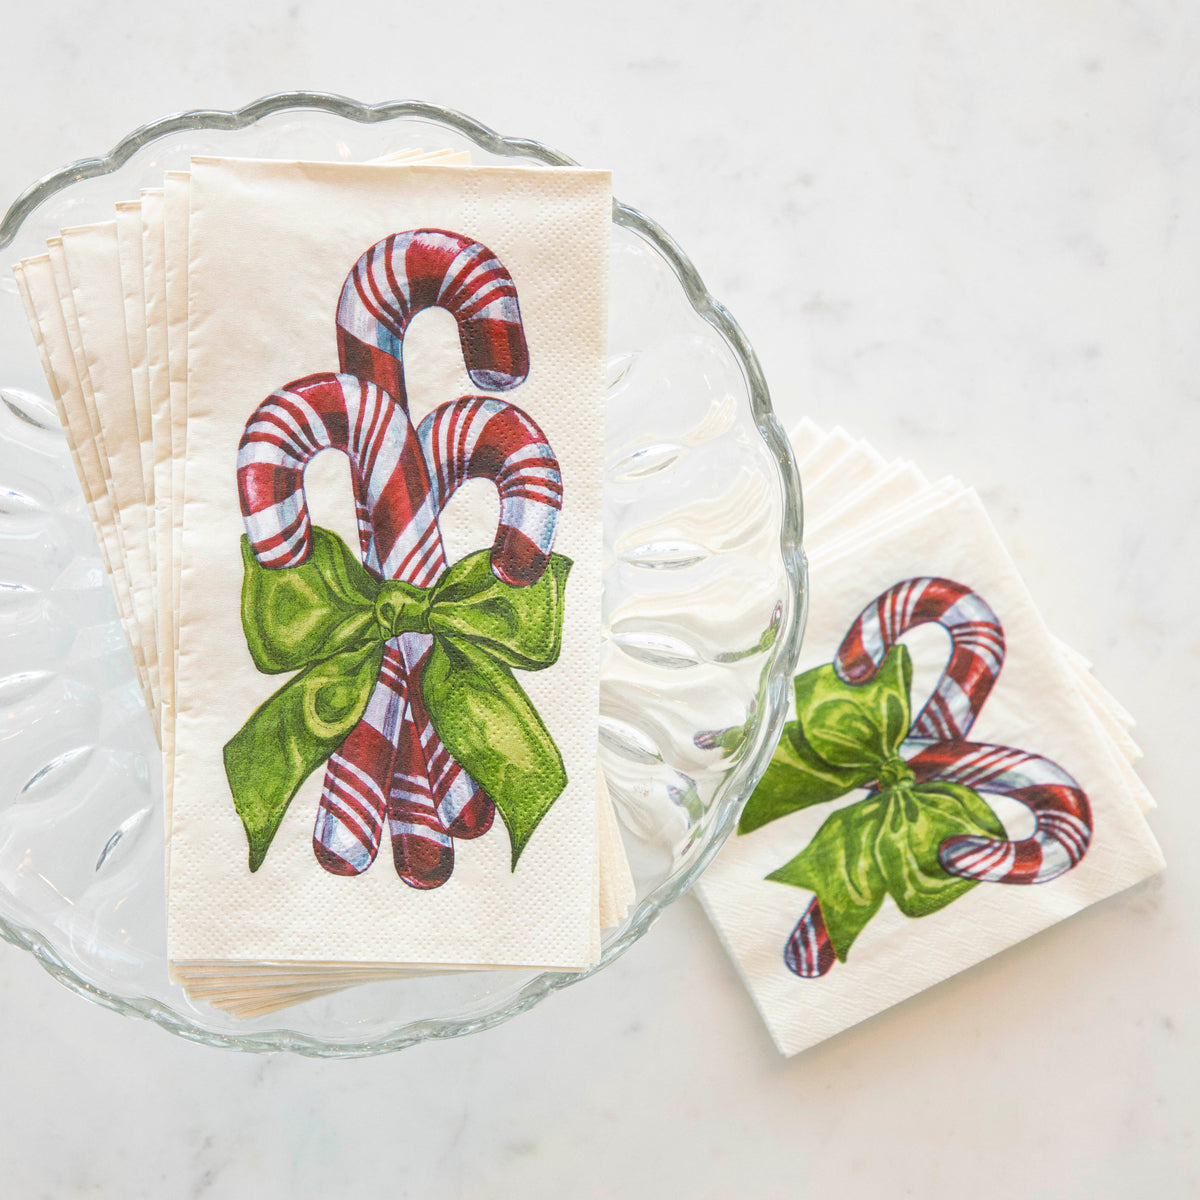 A stack of Candy Cane Guest Napkins fanned out on a glass cake stand, next to a stack of Candy Cane Cocktail Napkins fanned out on the table.